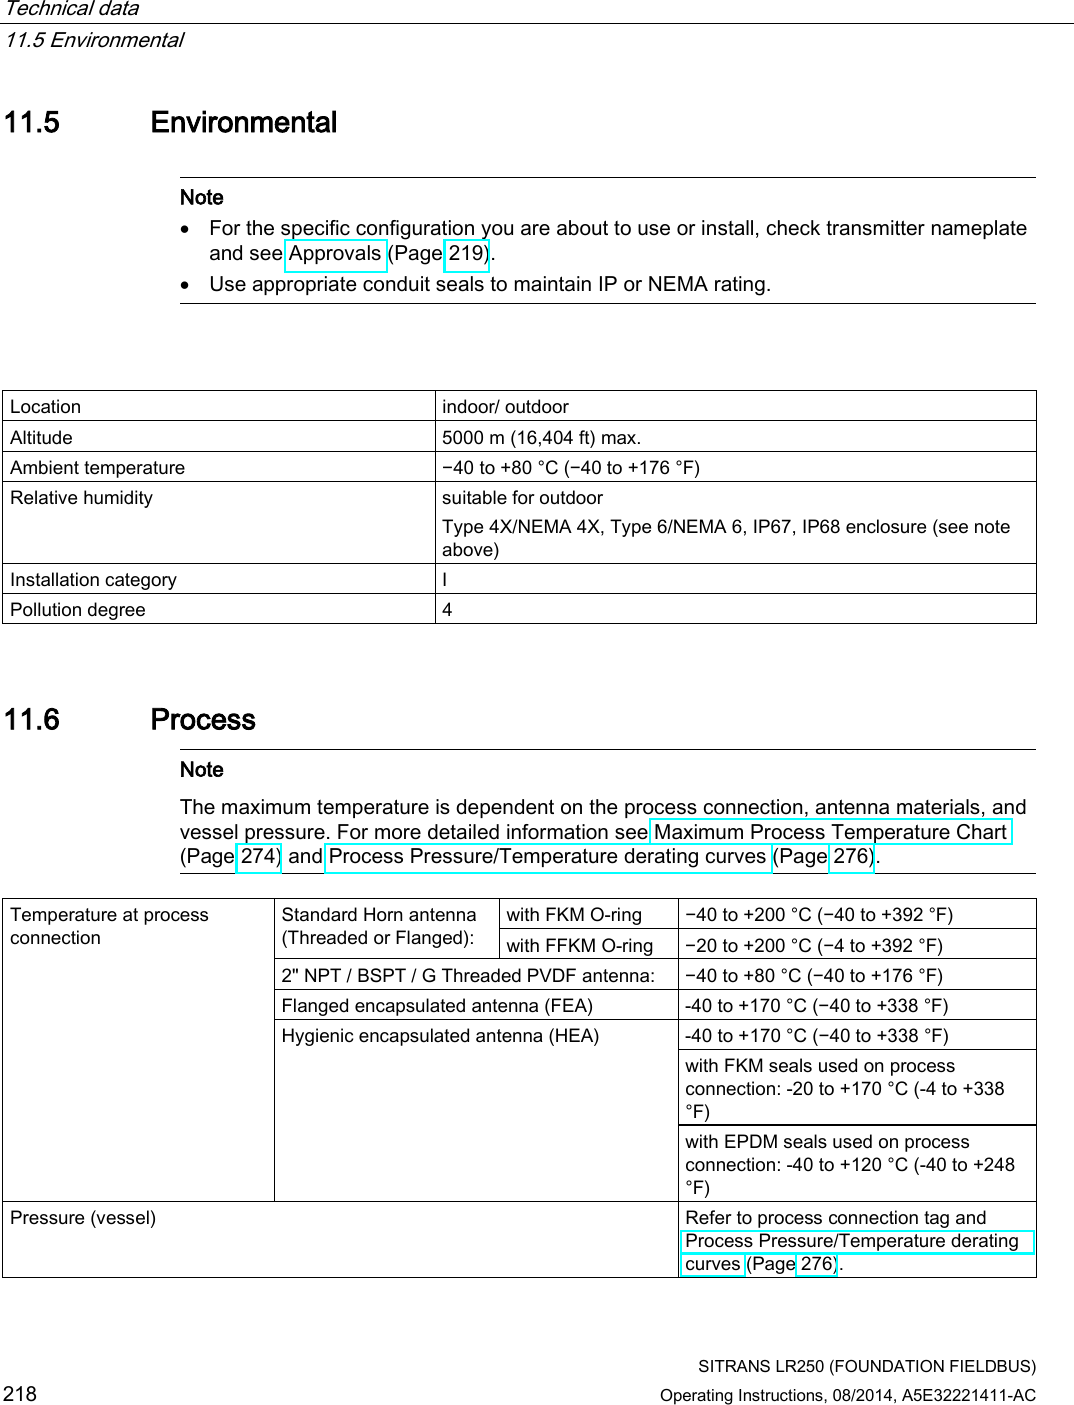 Technical data   11.5 Environmental  SITRANS LR250 (FOUNDATION FIELDBUS) 218 Operating Instructions, 08/2014, A5E32221411-AC 11.5 Environmental   Note • For the specific configuration you are about to use or install, check transmitter nameplate and see Approvals (Page 219).  • Use appropriate conduit seals to maintain IP or NEMA rating.    Location indoor/ outdoor Altitude 5000 m (16,404 ft) max. Ambient temperature −40 to +80 °C (−40 to +176 °F) Relative humidity suitable for outdoor  Type 4X/NEMA 4X, Type 6/NEMA 6, IP67, IP68 enclosure (see note above) Installation category  I Pollution degree  4  11.6 Process  Note The maximum temperature is dependent on the process connection, antenna materials, and vessel pressure. For more detailed information see Maximum Process Temperature Chart (Page 274) and Process Pressure/Temperature derating curves (Page 276).   Temperature at process connection Standard Horn antenna (Threaded or Flanged):  with FKM O-ring  −40 to +200 °C (−40 to +392 °F) with FFKM O-ring  −20 to +200 °C (−4 to +392 °F) 2&quot; NPT / BSPT / G Threaded PVDF antenna: −40 to +80 °C (−40 to +176 °F) Flanged encapsulated antenna (FEA)  -40 to +170 °C (−40 to +338 °F) Hygienic encapsulated antenna (HEA)  -40 to +170 °C (−40 to +338 °F) with FKM seals used on process connection: -20 to +170 °C (-4 to +338 °F) with EPDM seals used on process connection: -40 to +120 °C (-40 to +248 °F) Pressure (vessel) Refer to process connection tag and Process Pressure/Temperature derating curves (Page 276).  